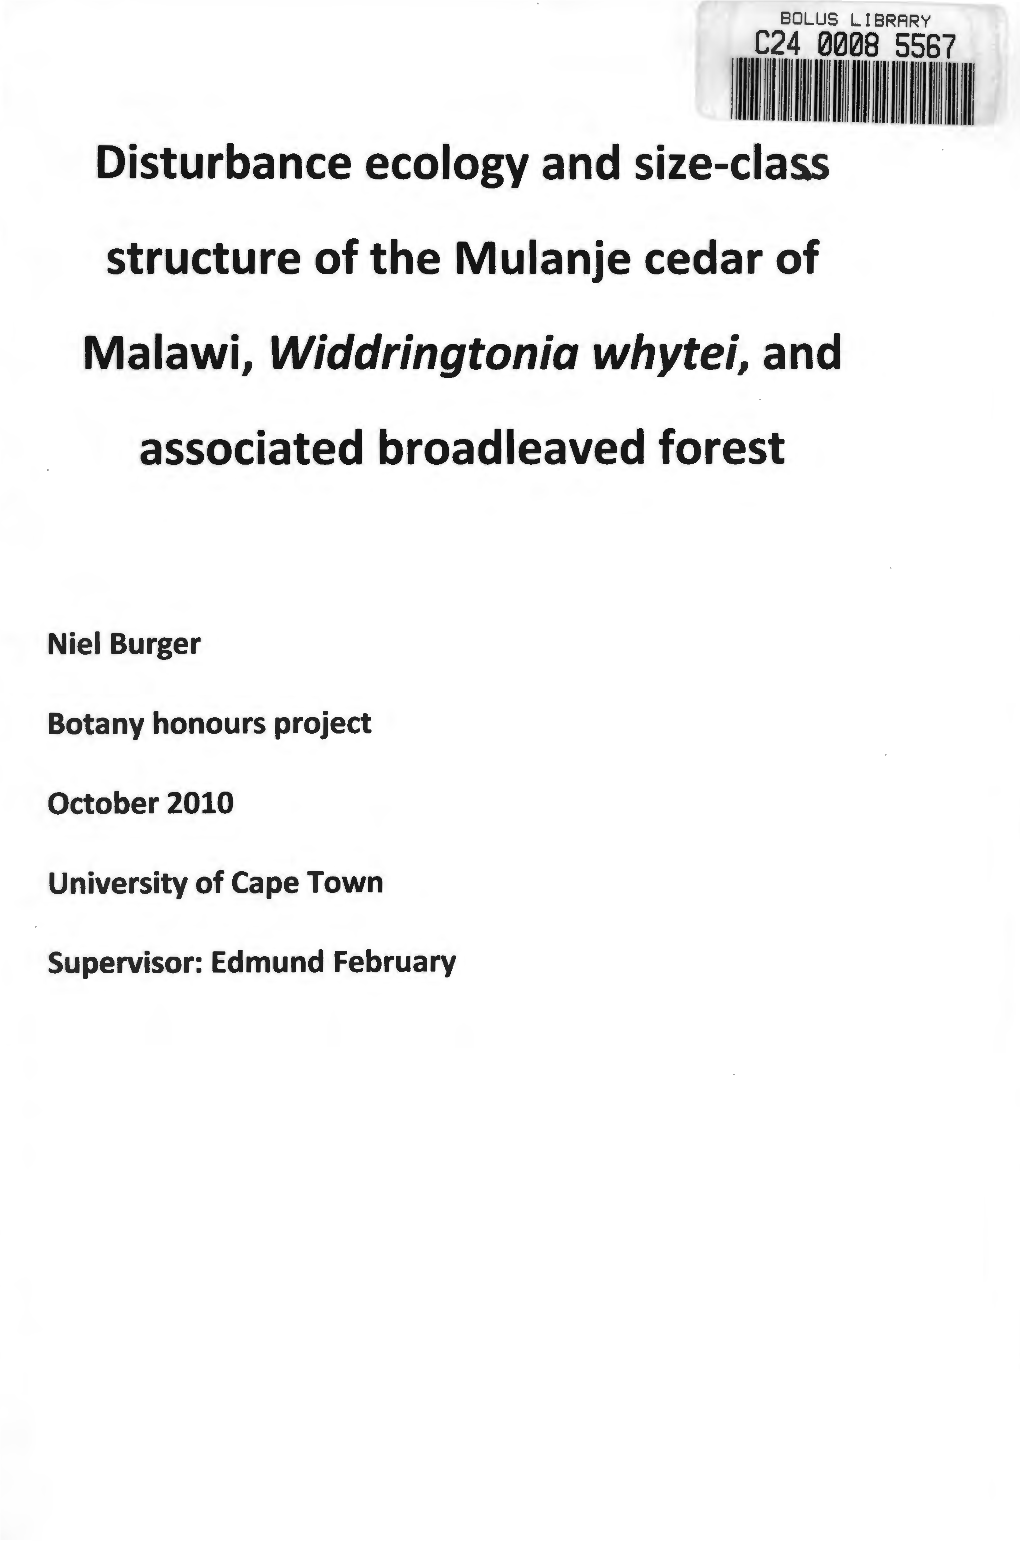 Disturbance Ecology and Size-Class Structure of the Mulanje Cedar of Malawi, Widdringtonia Whytei, and Associated Broadleaved Fo